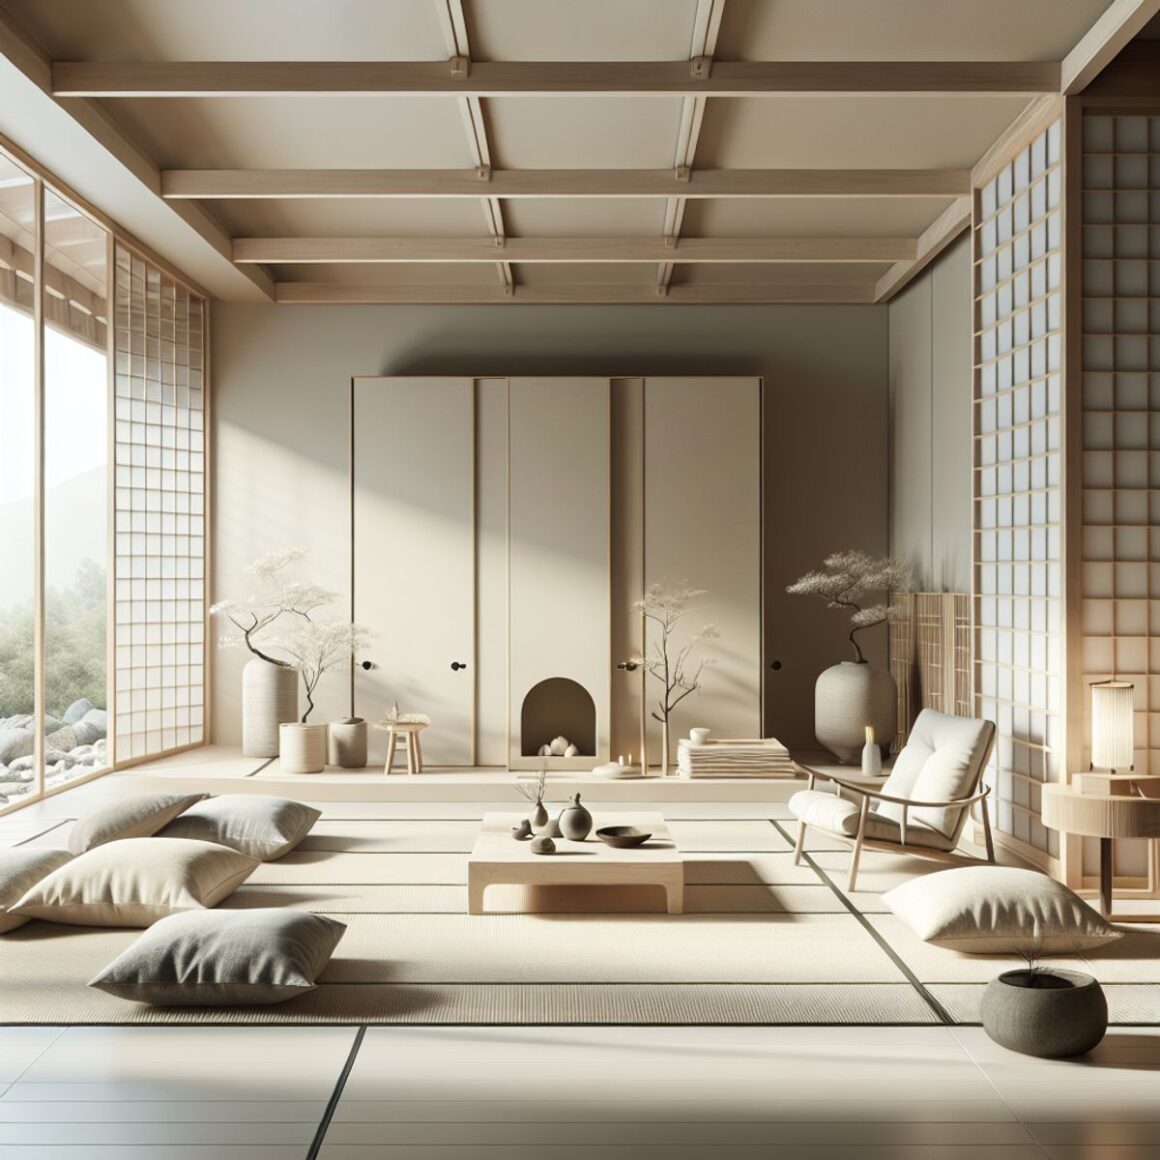 A serene and minimalist Japanese-inspired room with Scandinavian design elements.